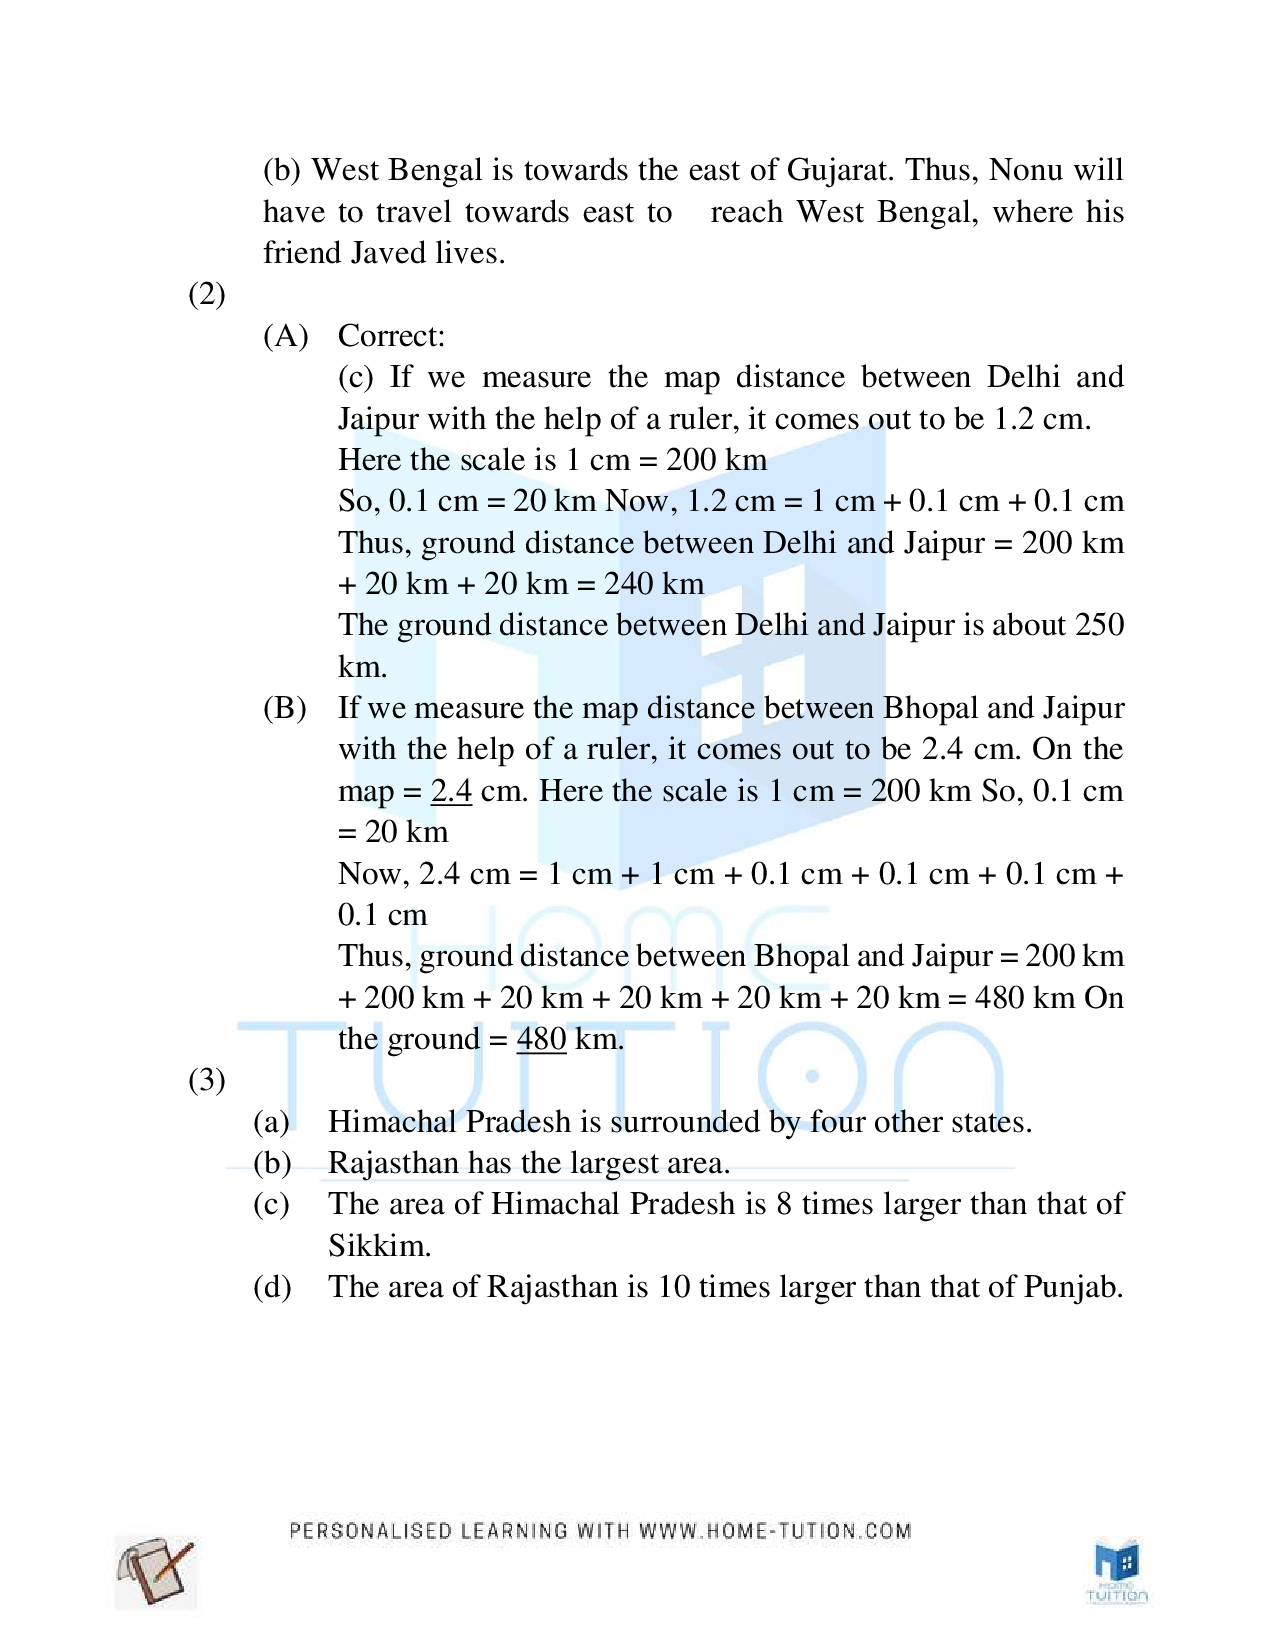 NCERT Class 5 Maths Chapter 8 Mapping Your Way